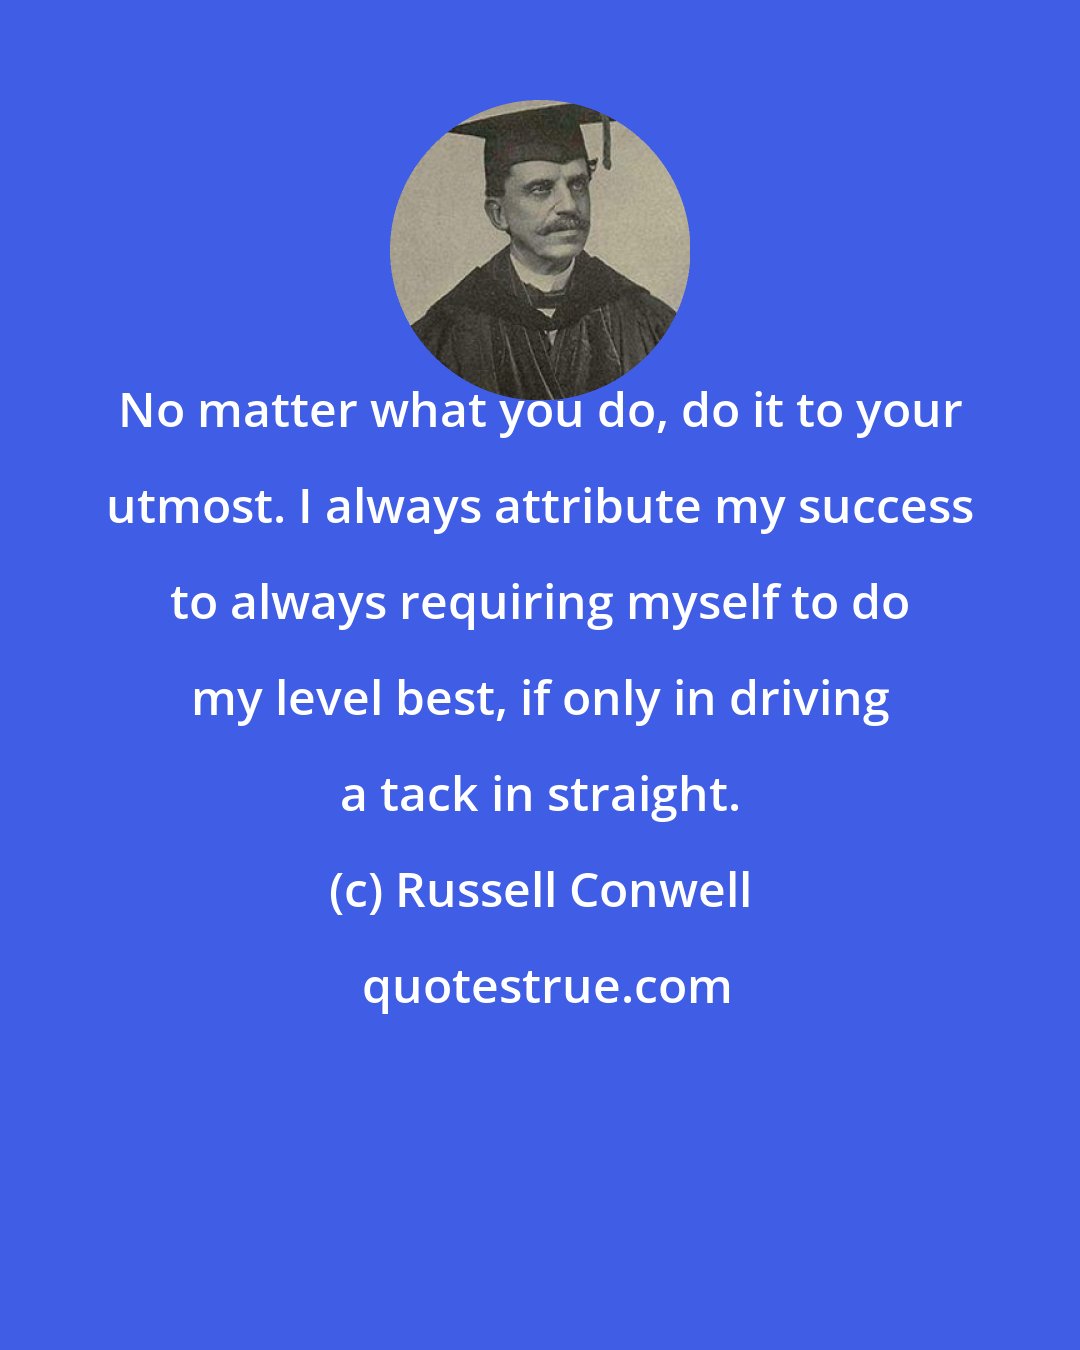 Russell Conwell: No matter what you do, do it to your utmost. I always attribute my success to always requiring myself to do my level best, if only in driving a tack in straight.